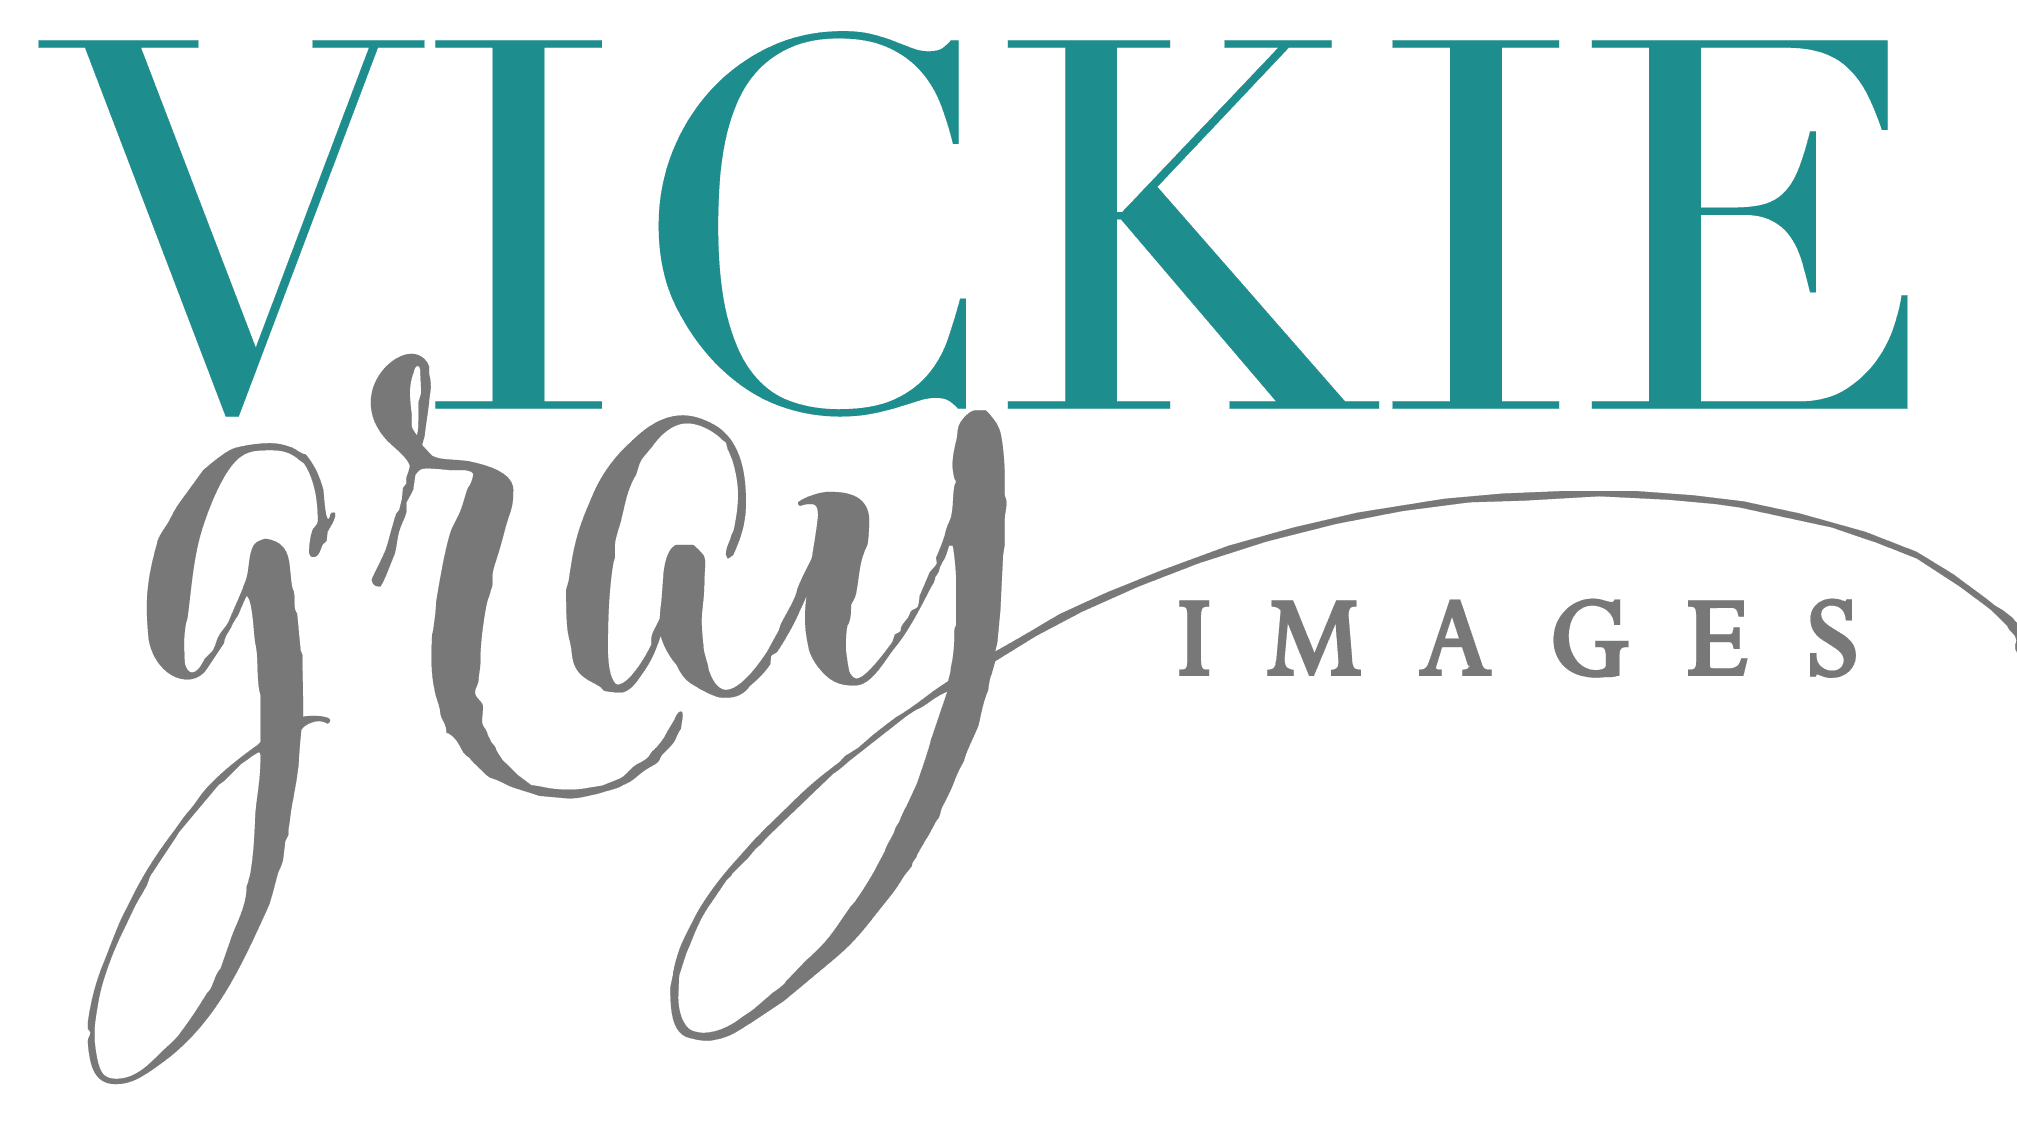 Baltimore commercial photographer, headshot and corporate, logo Vickie Gray Images 72